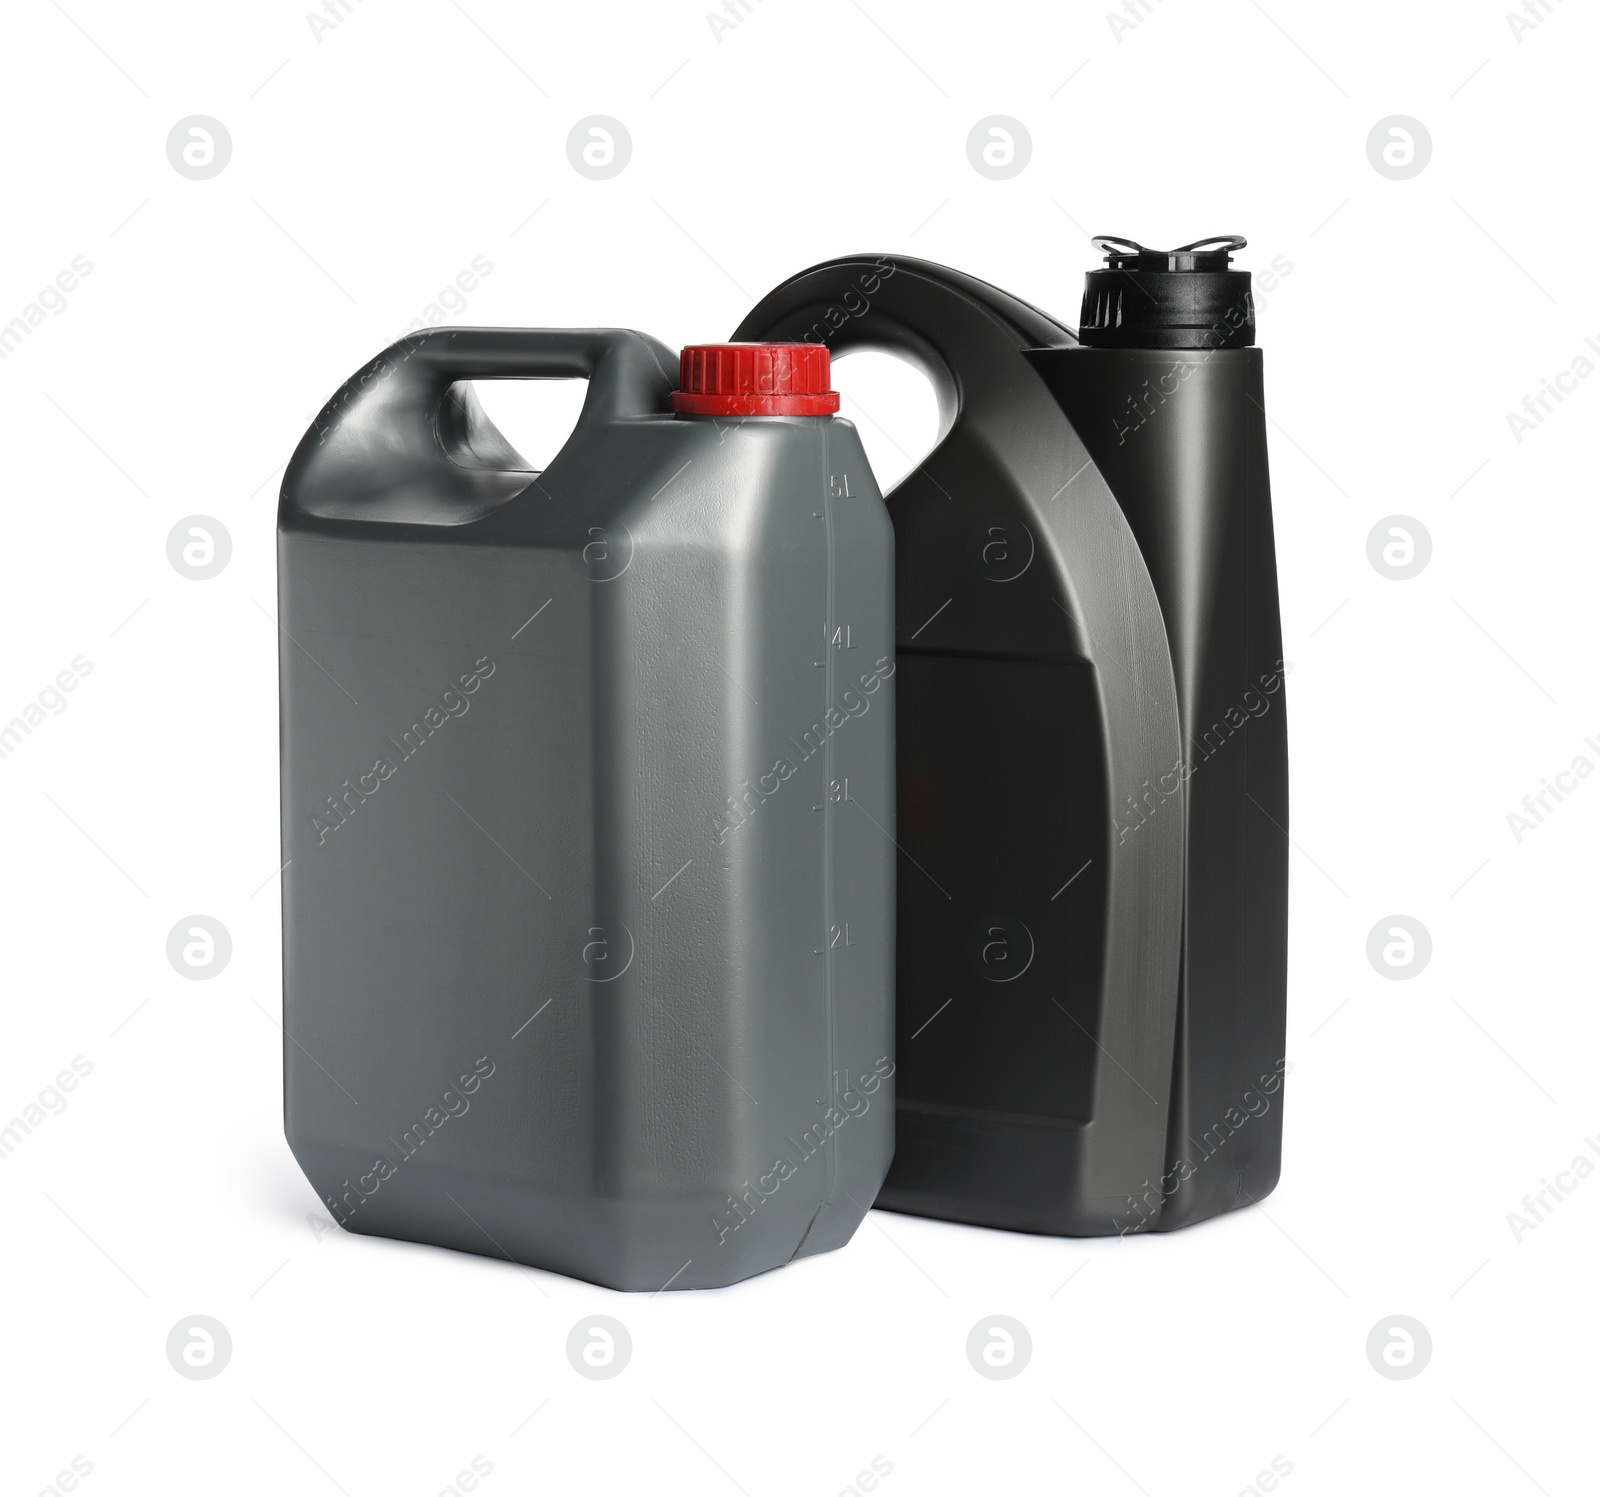 Photo of Black and grey canisters on white background